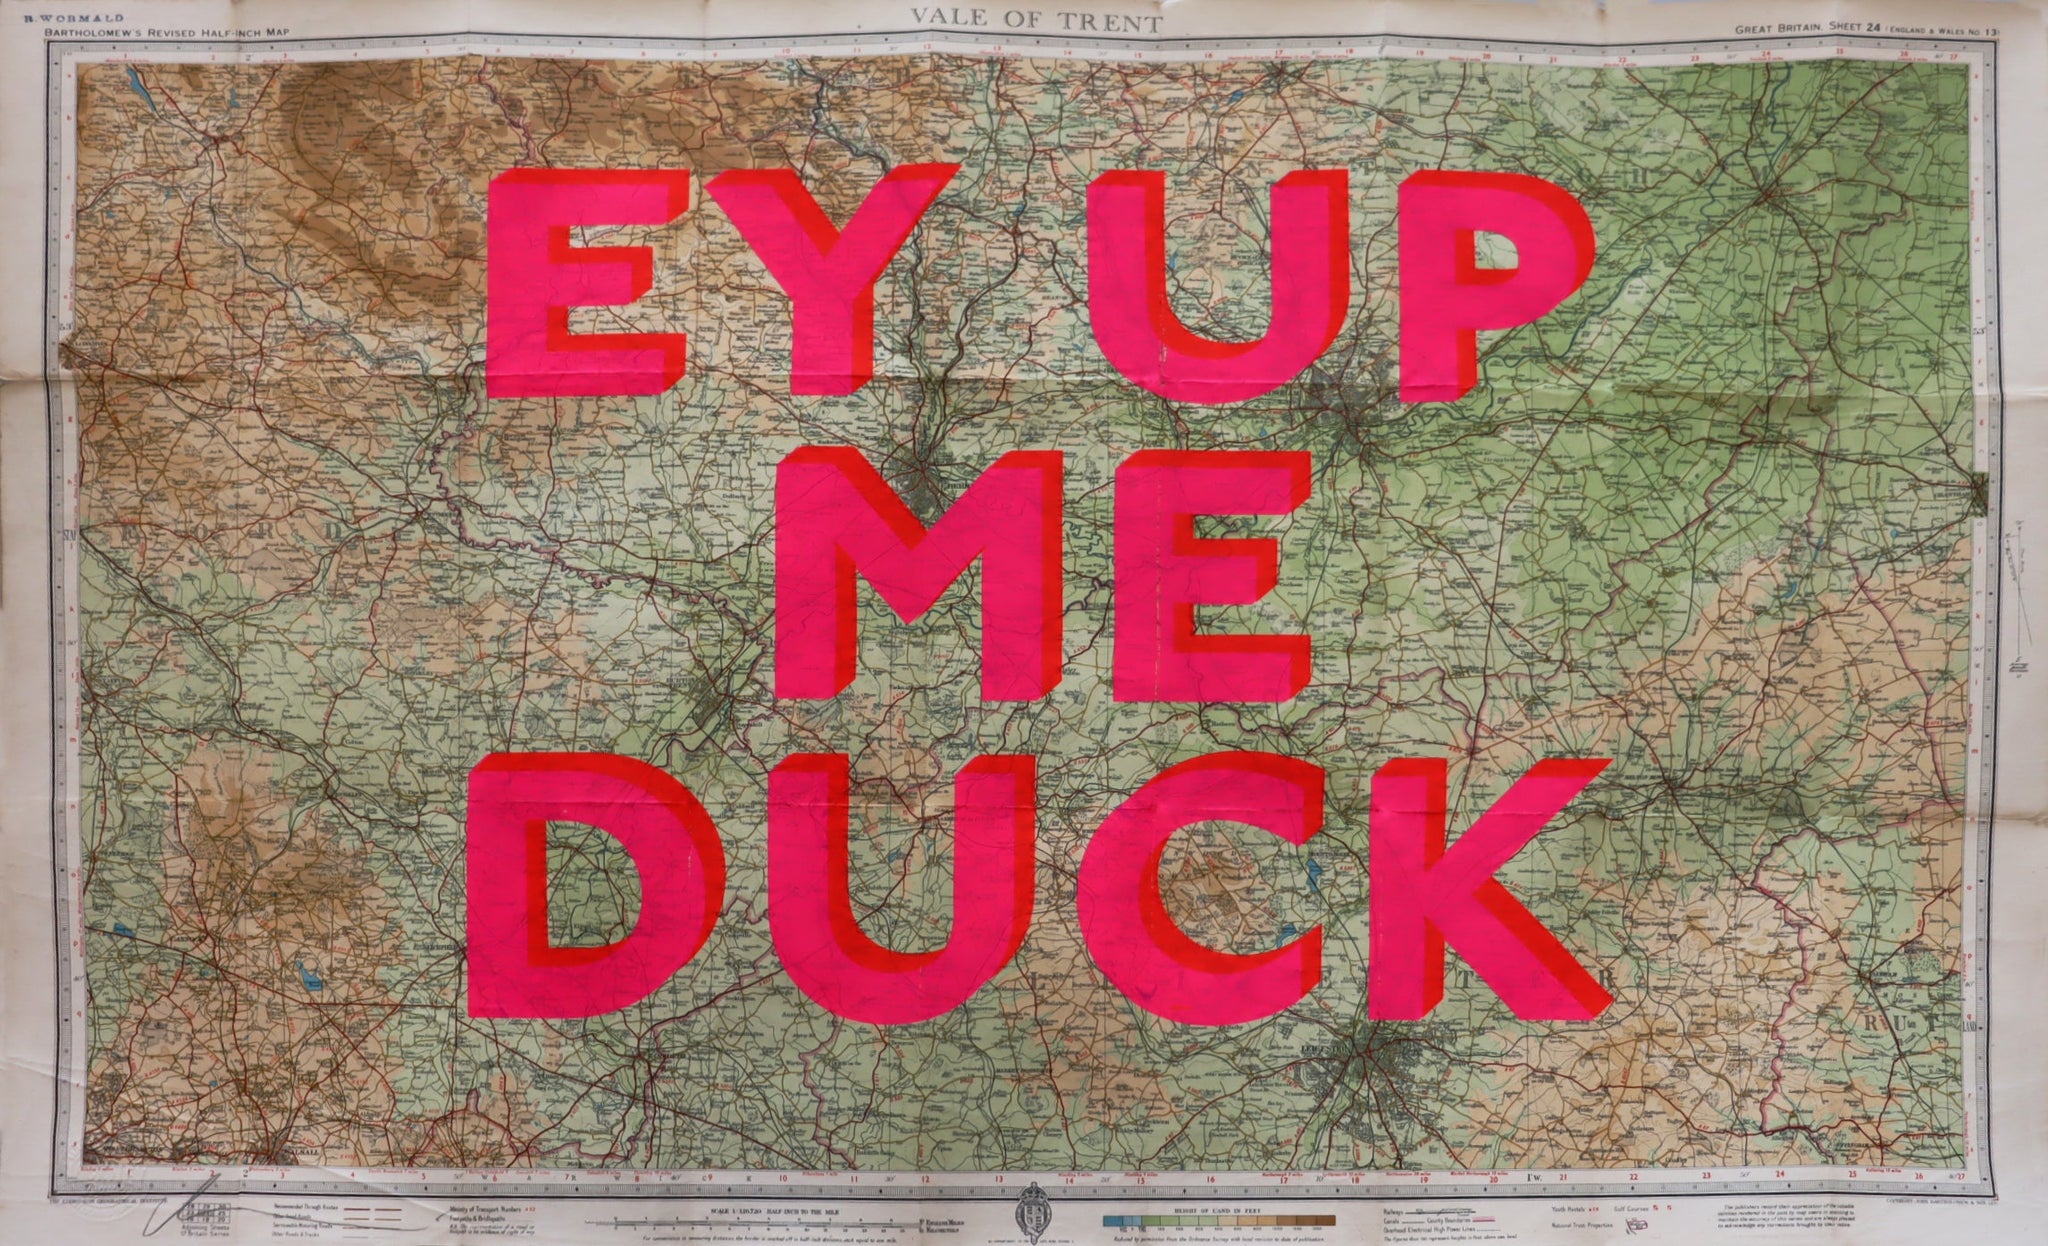 Ey Up Me Duck